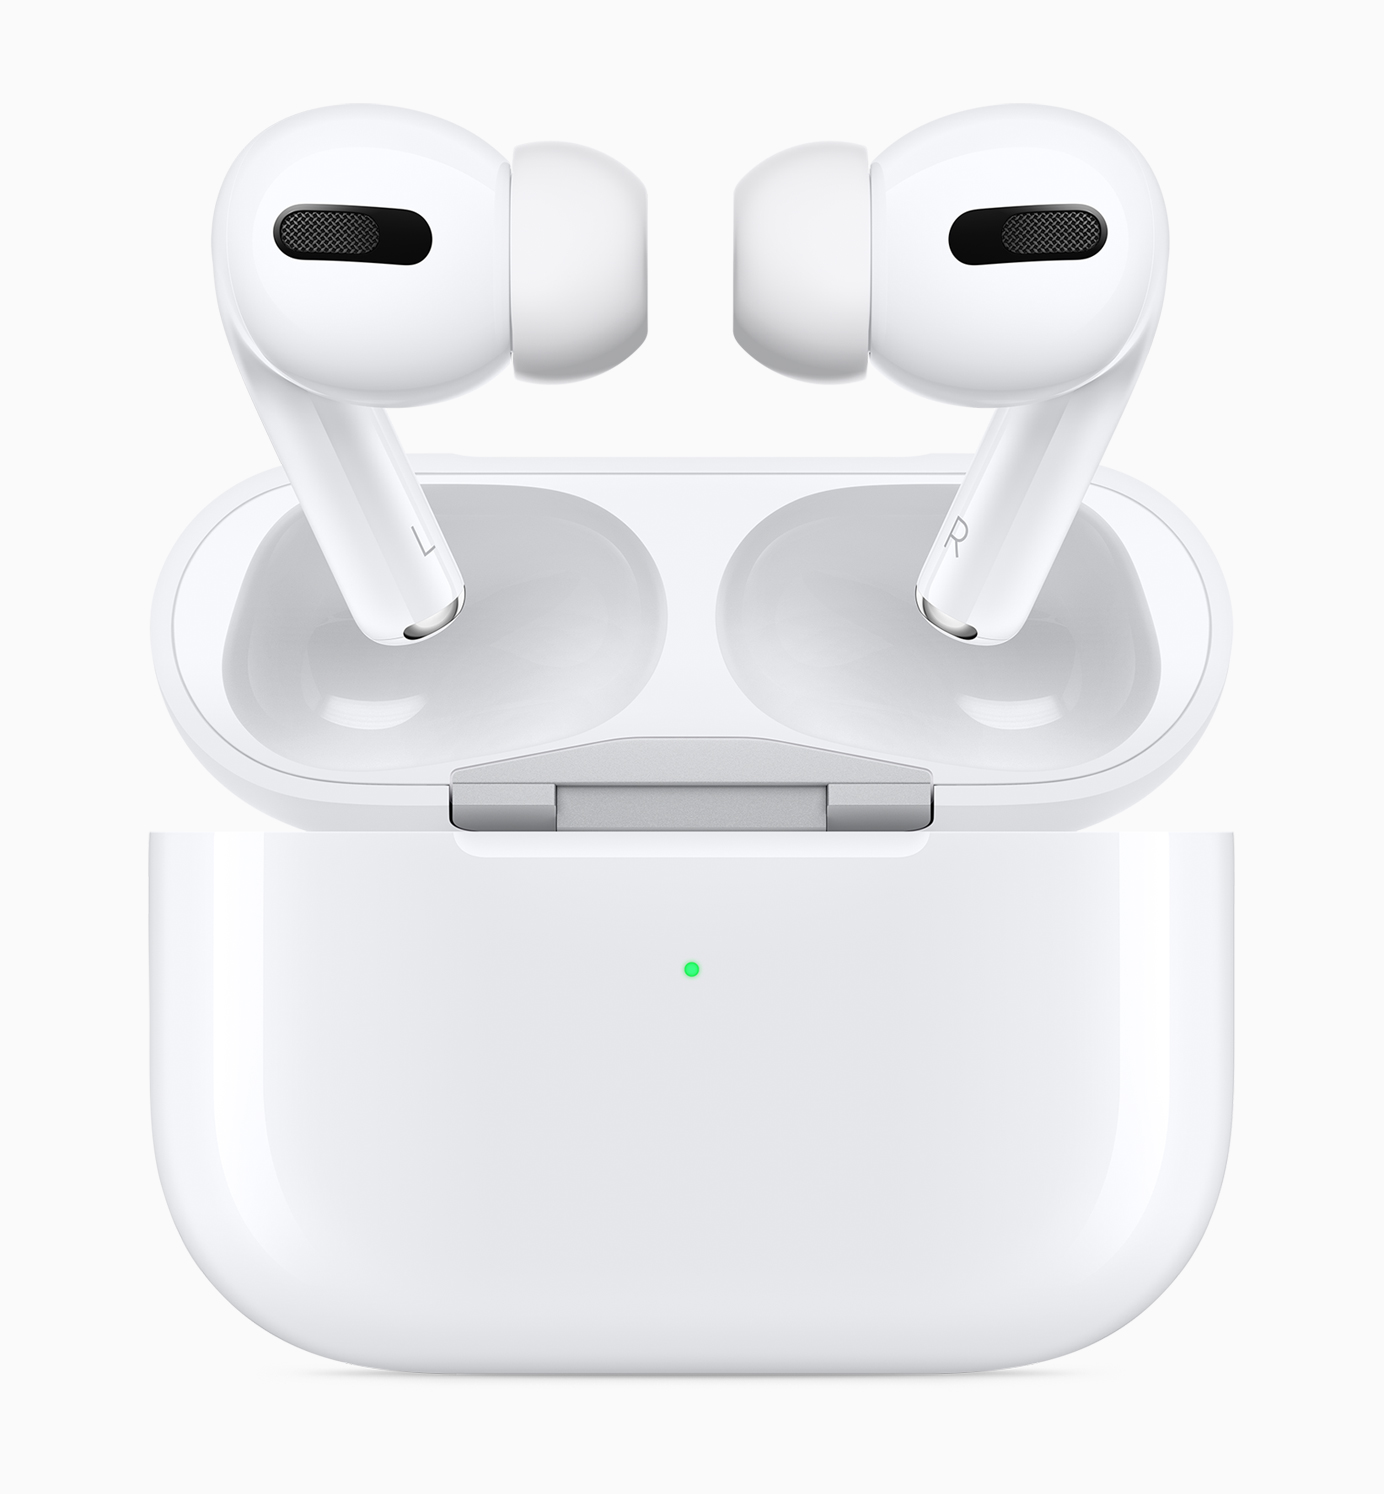 AirPods Pro in case